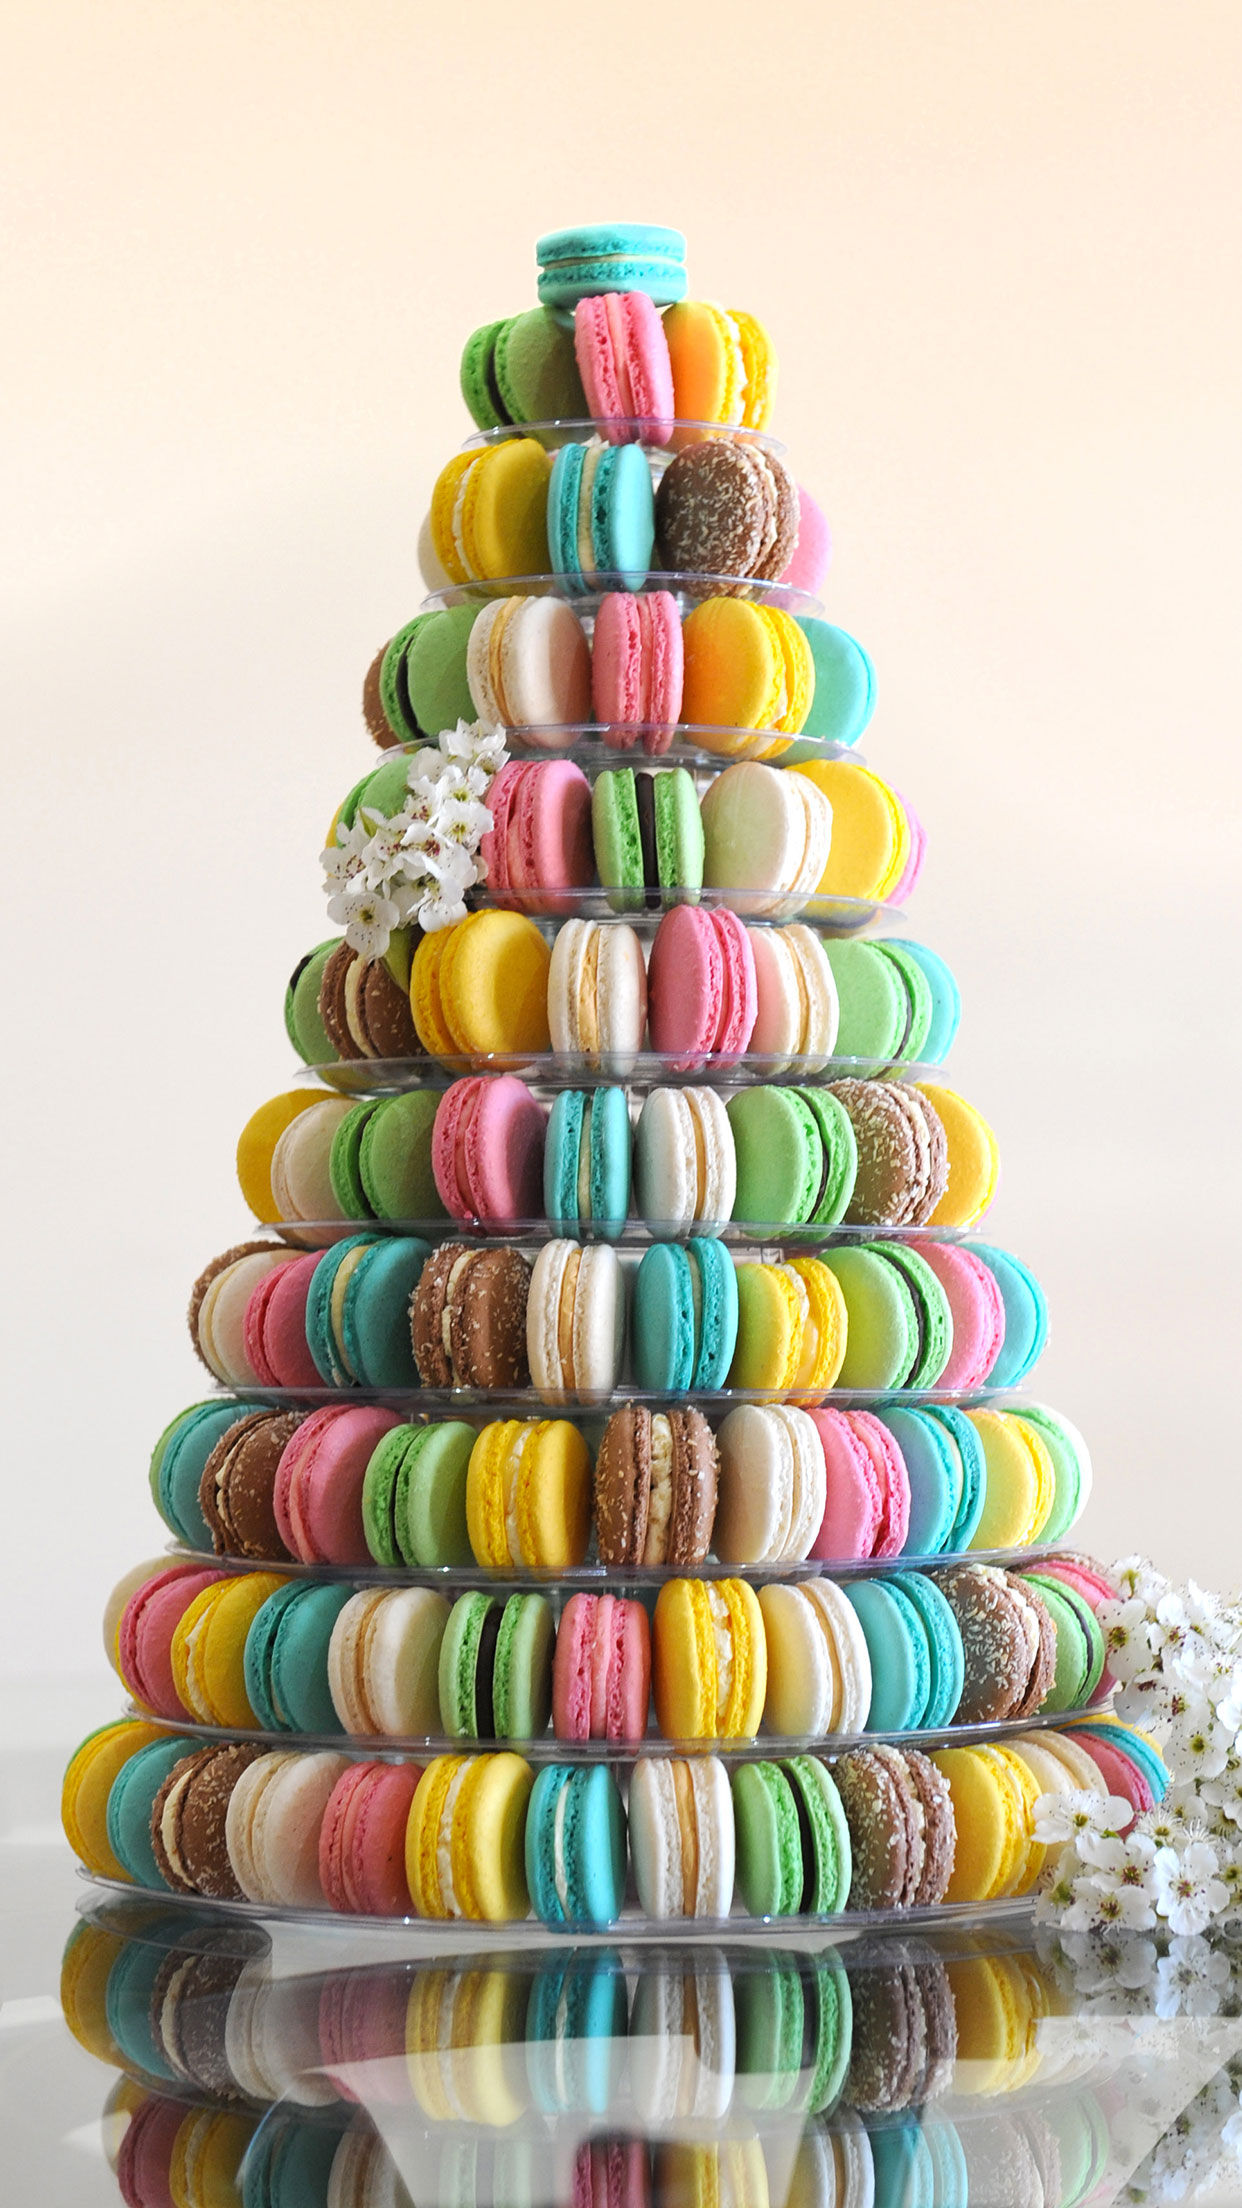 Macaroon pyramid wallpaper for iphone pro max x